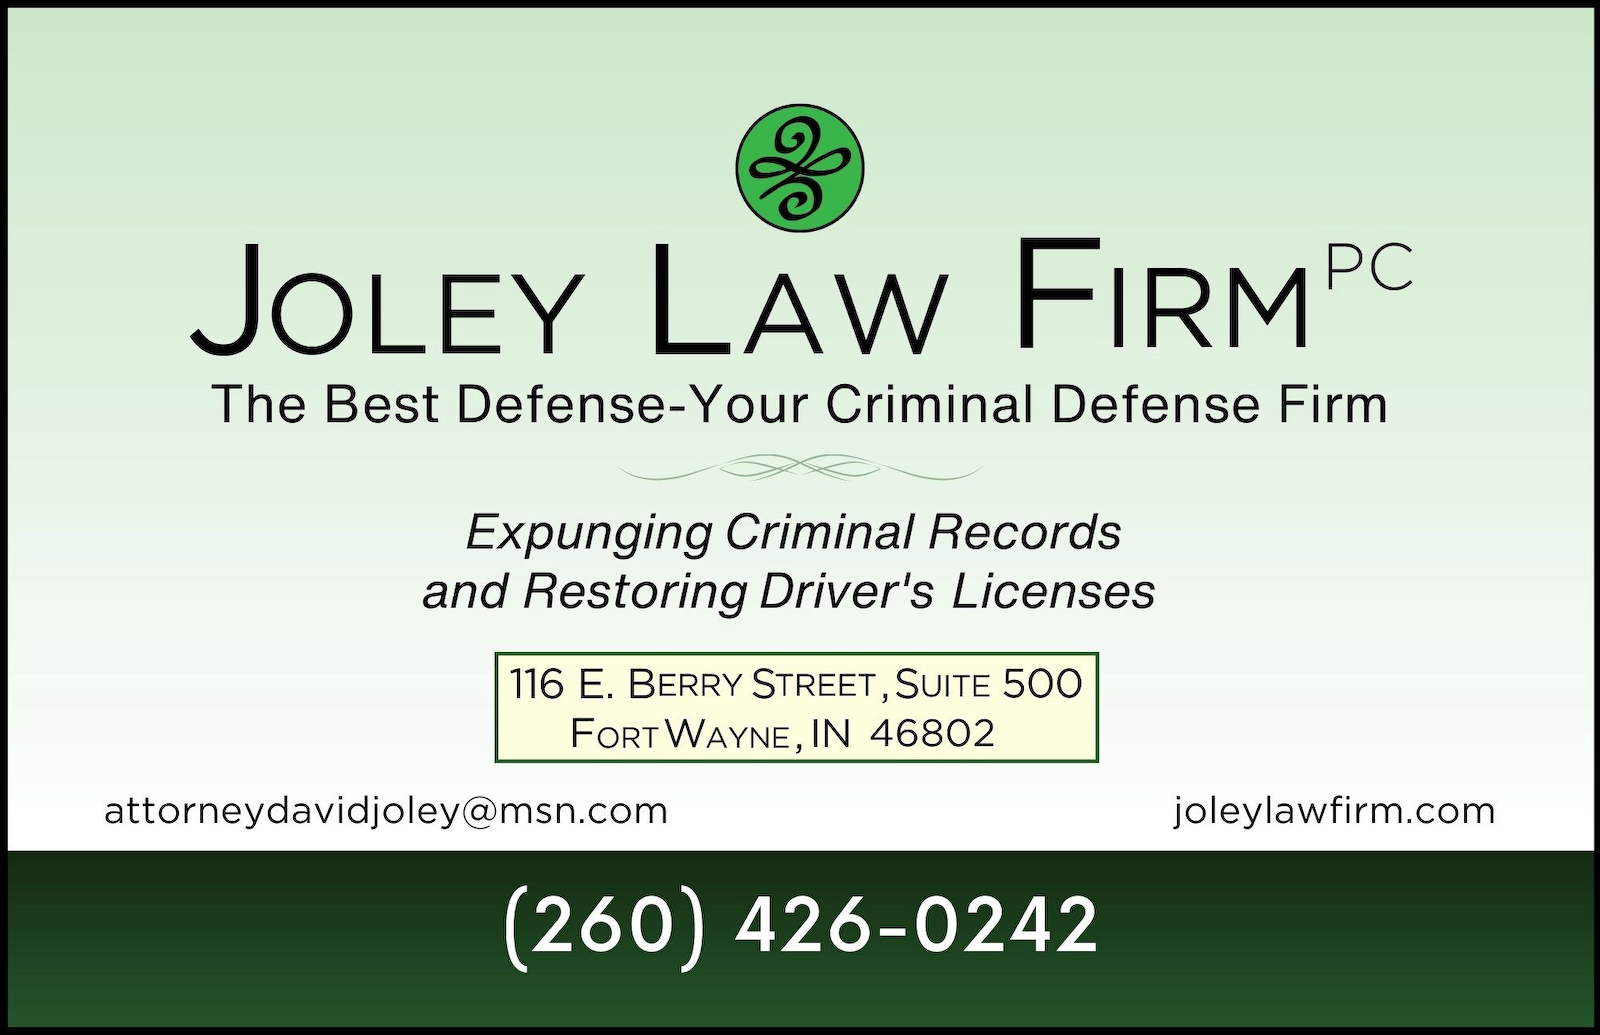 JOLEY LAW FIRM